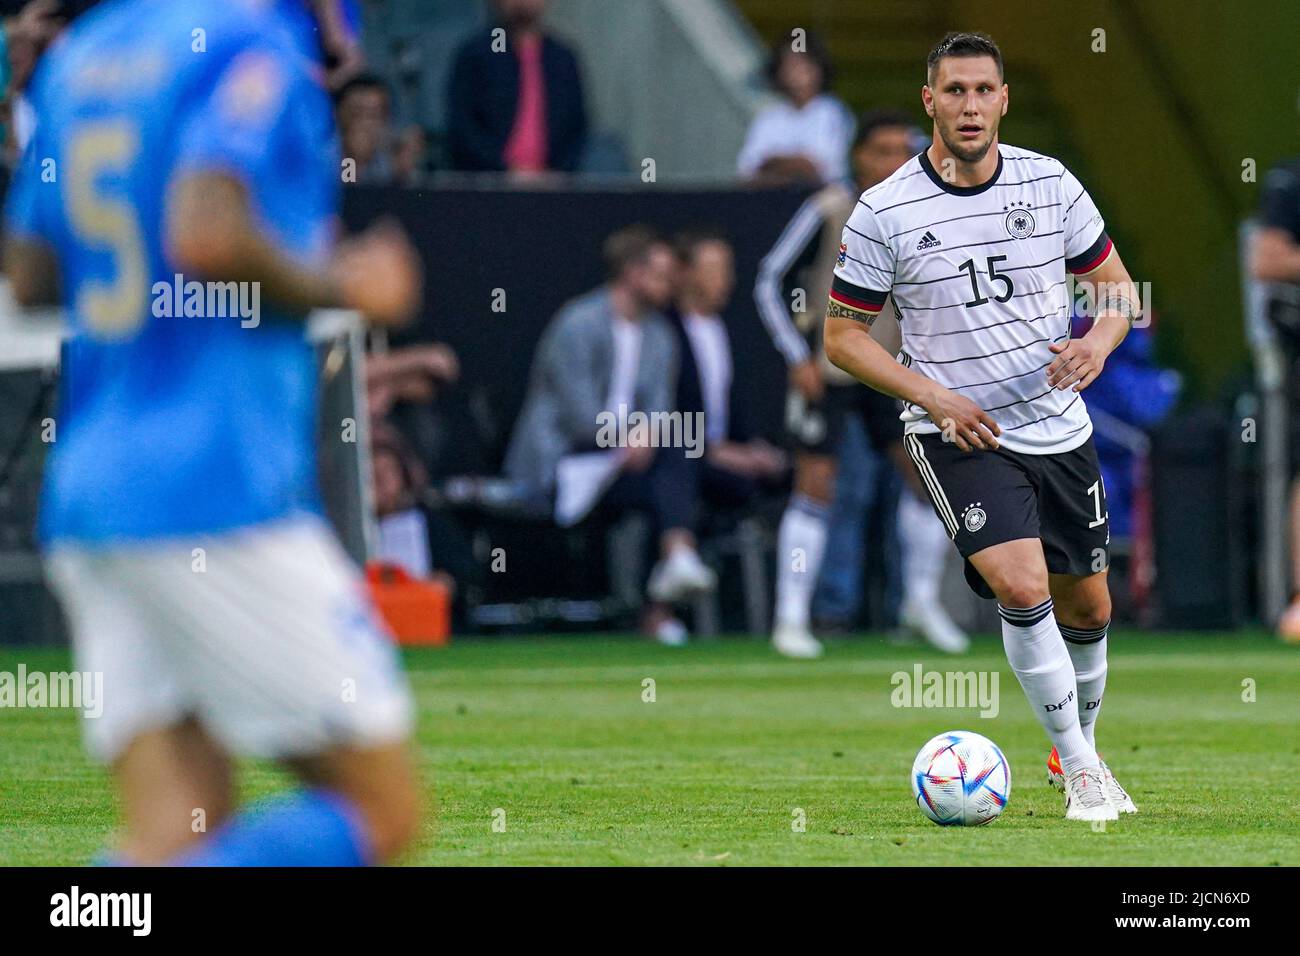 MöNCHENGLADBACH, GERMANY - JUNE 14: Niklas Sule of Germany during the UEFA Nations League match between Germany and Italy at Borussia-Park on June 14, 2022 in Mönchengladbach, Germany (Photo by Joris Verwijst/Orange Pictures) Stock Photo